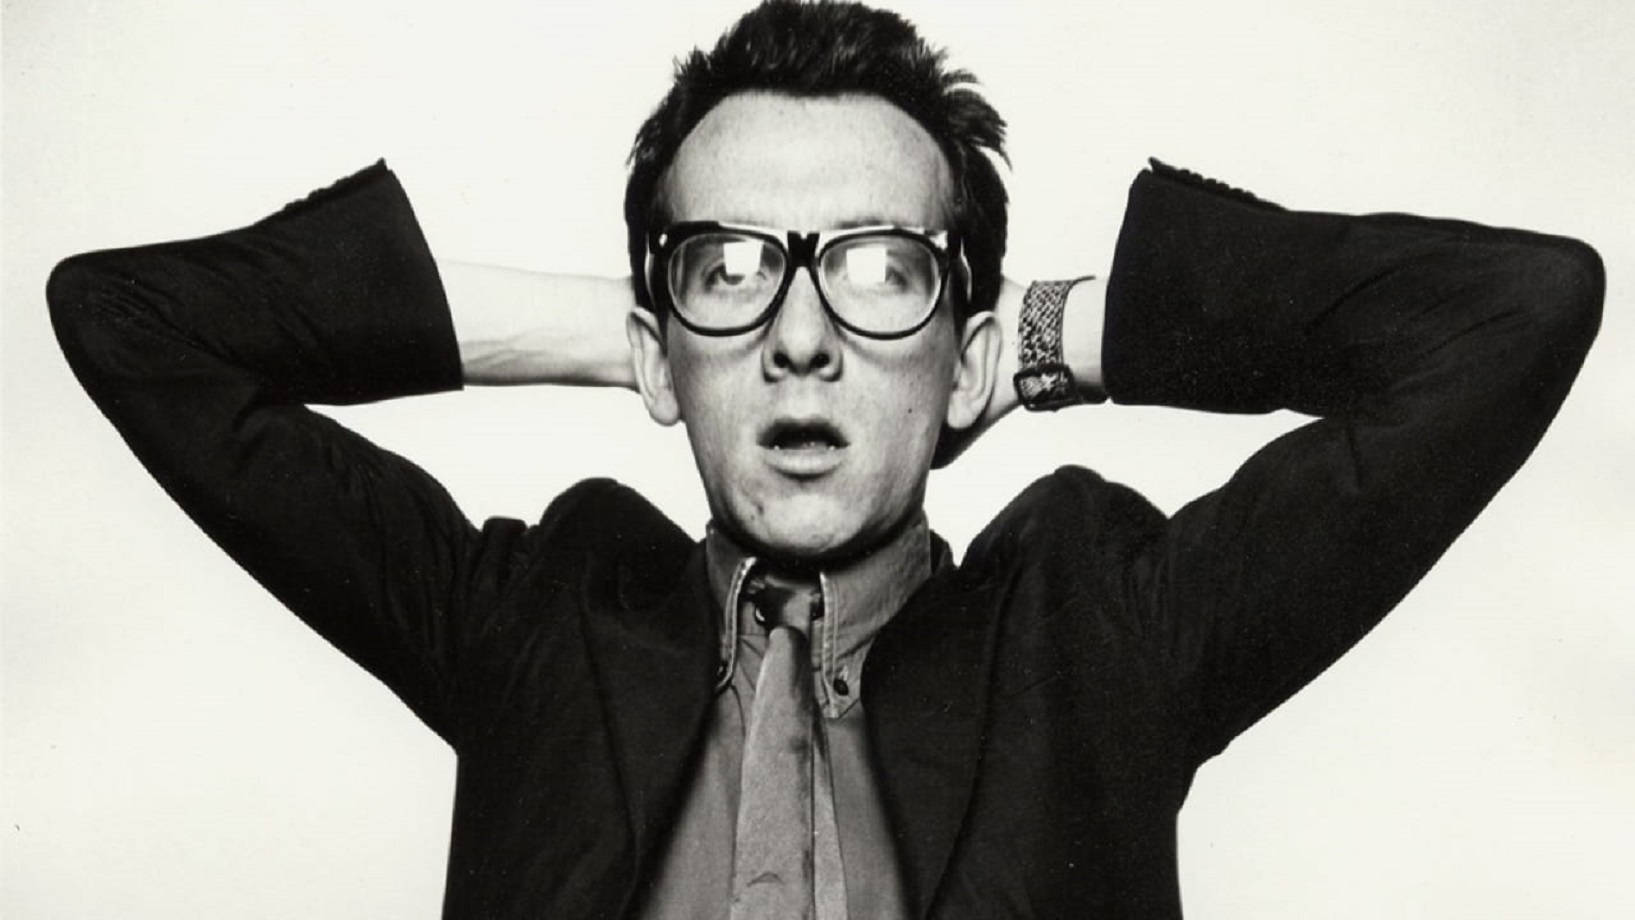 Caption: Young Elvis Costello Sporting His Iconic Nerd Look Wallpaper